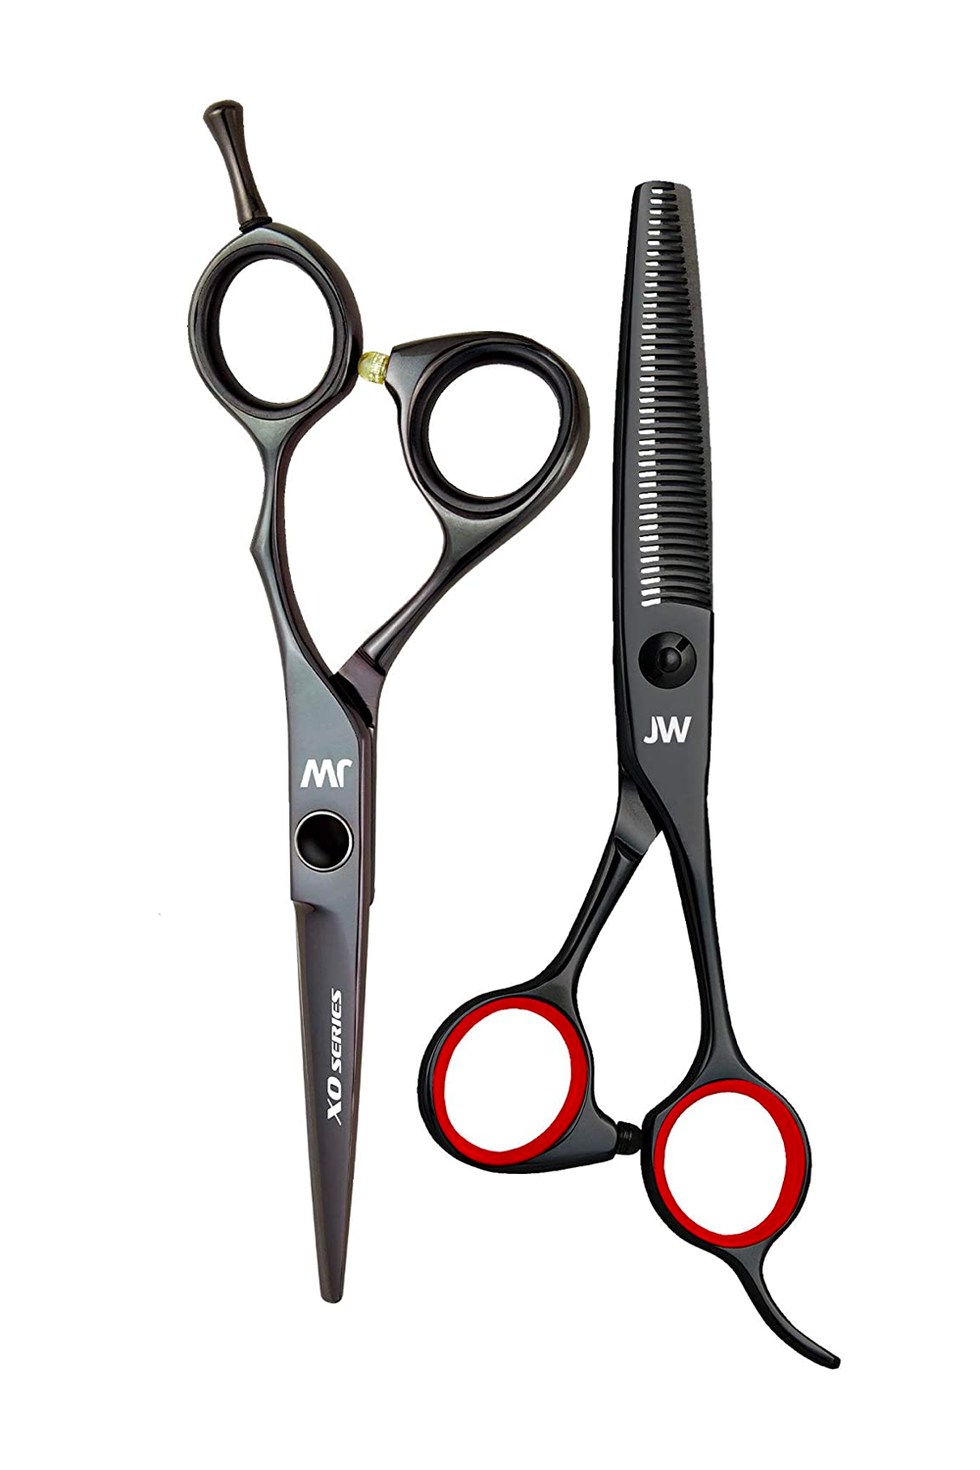 These are the best scissors I've ever owned